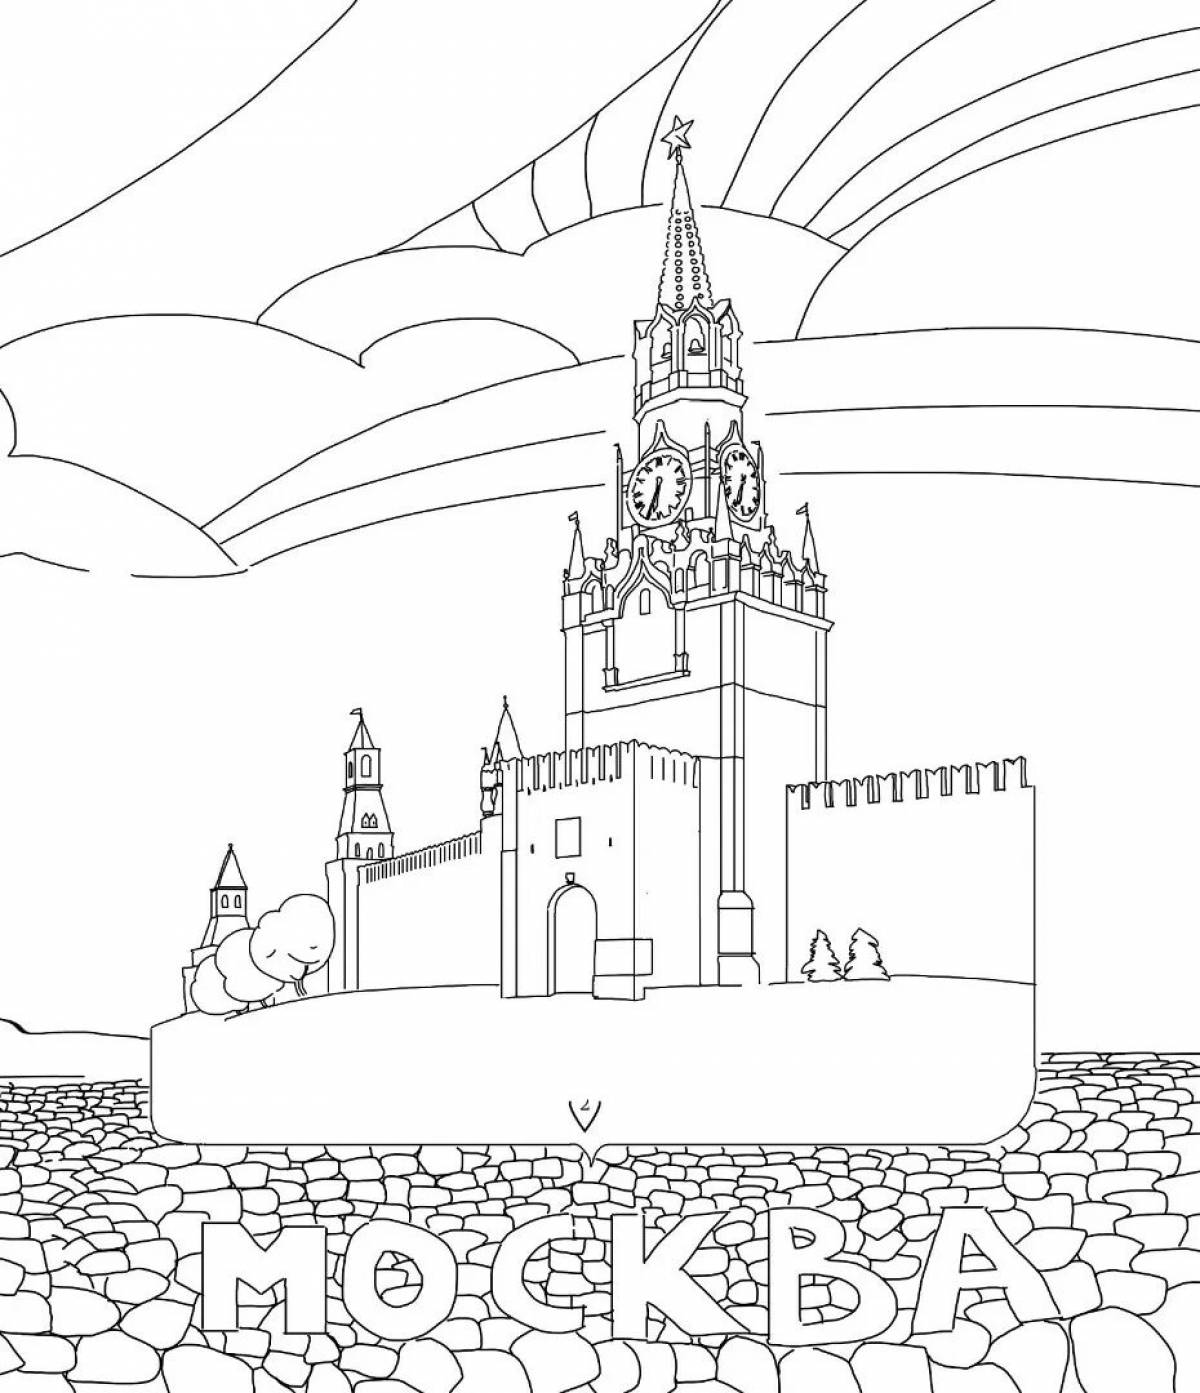 Comic kremlin moscow coloring book for kids